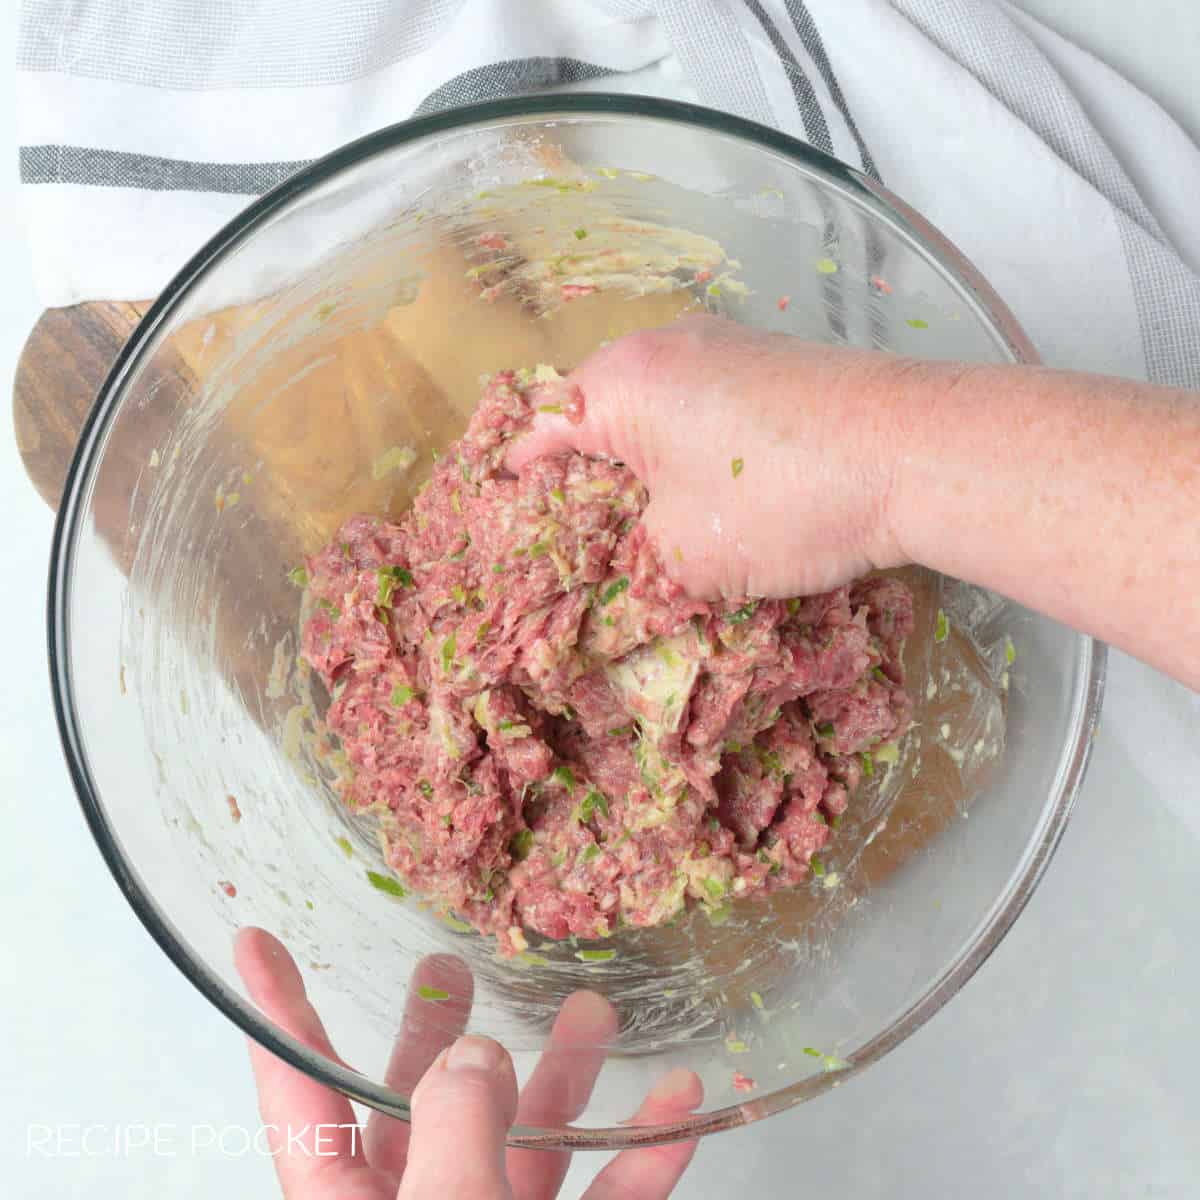 A hand mixing ground beef and other ingedients together.